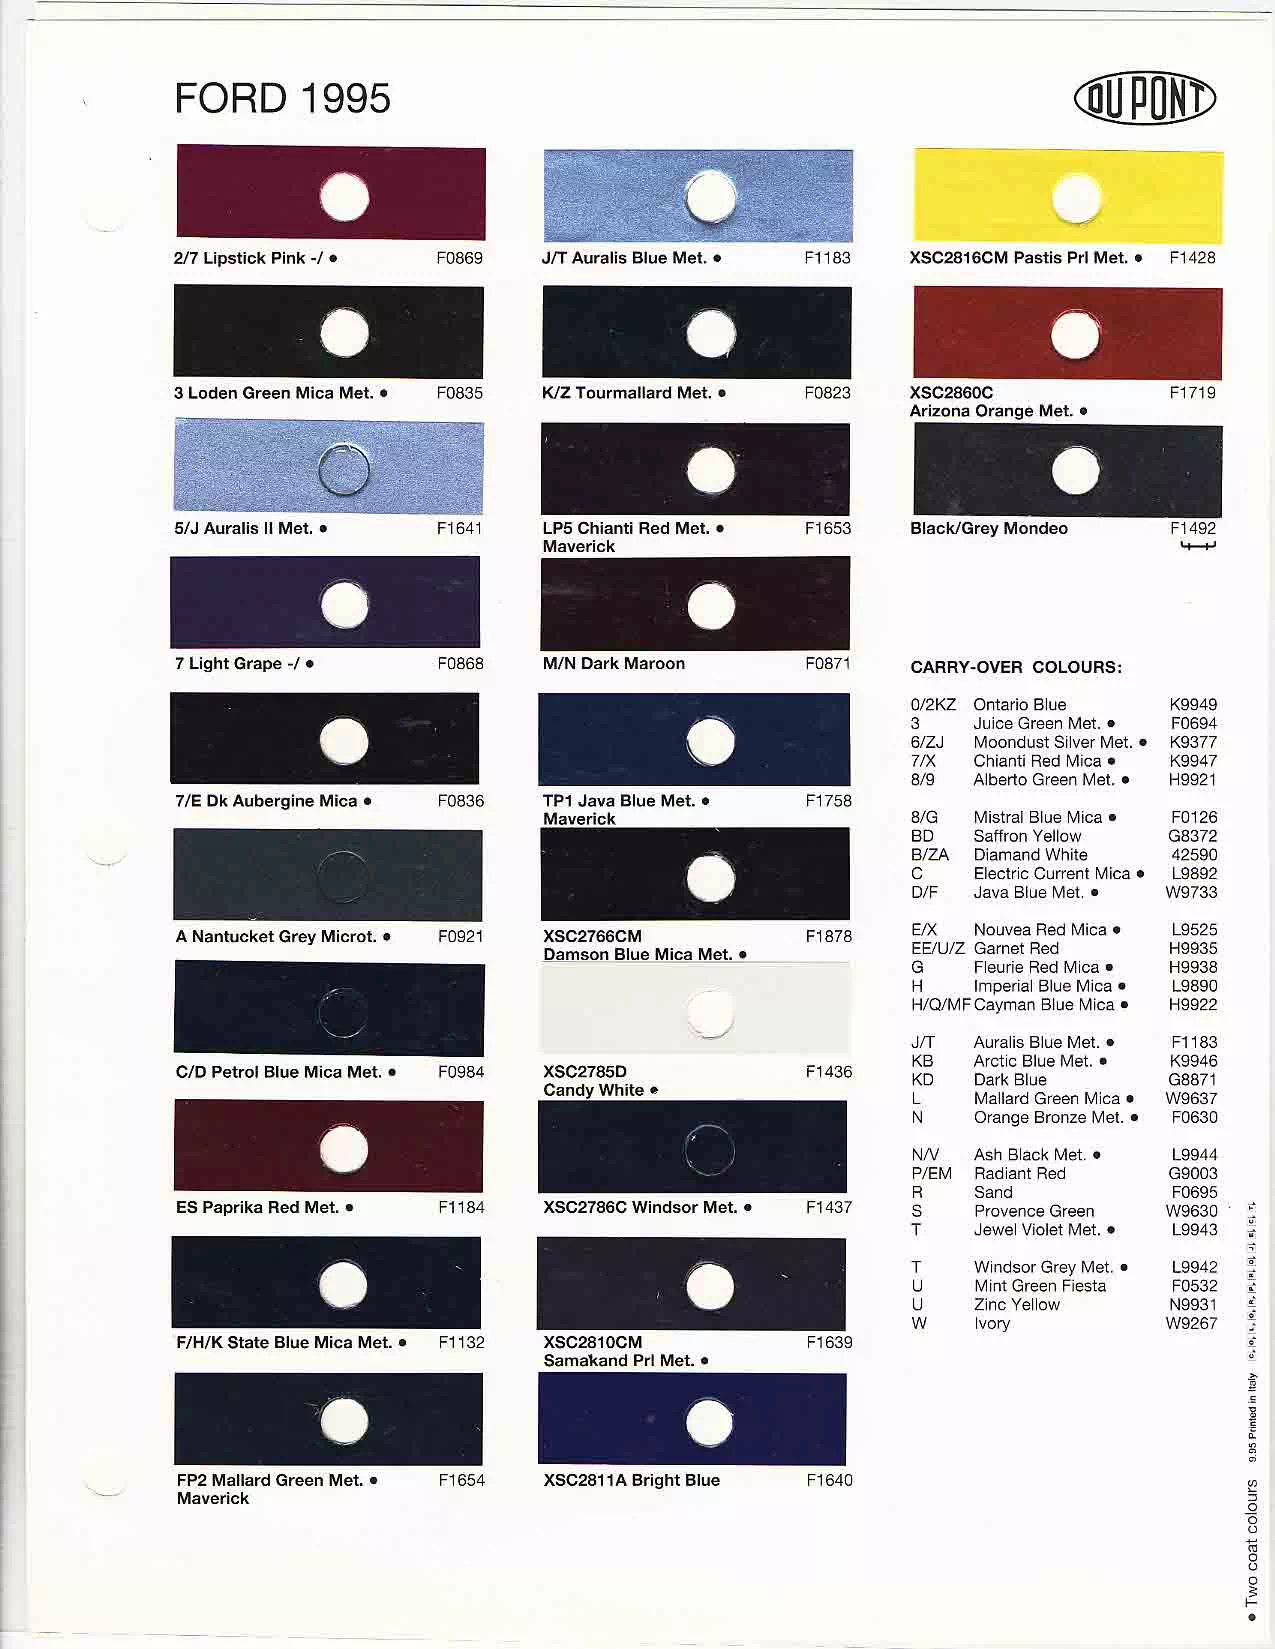 Paint Codes ( found on the driver door)  for Ford, Mercury & Lincoln 1995 Vehicles